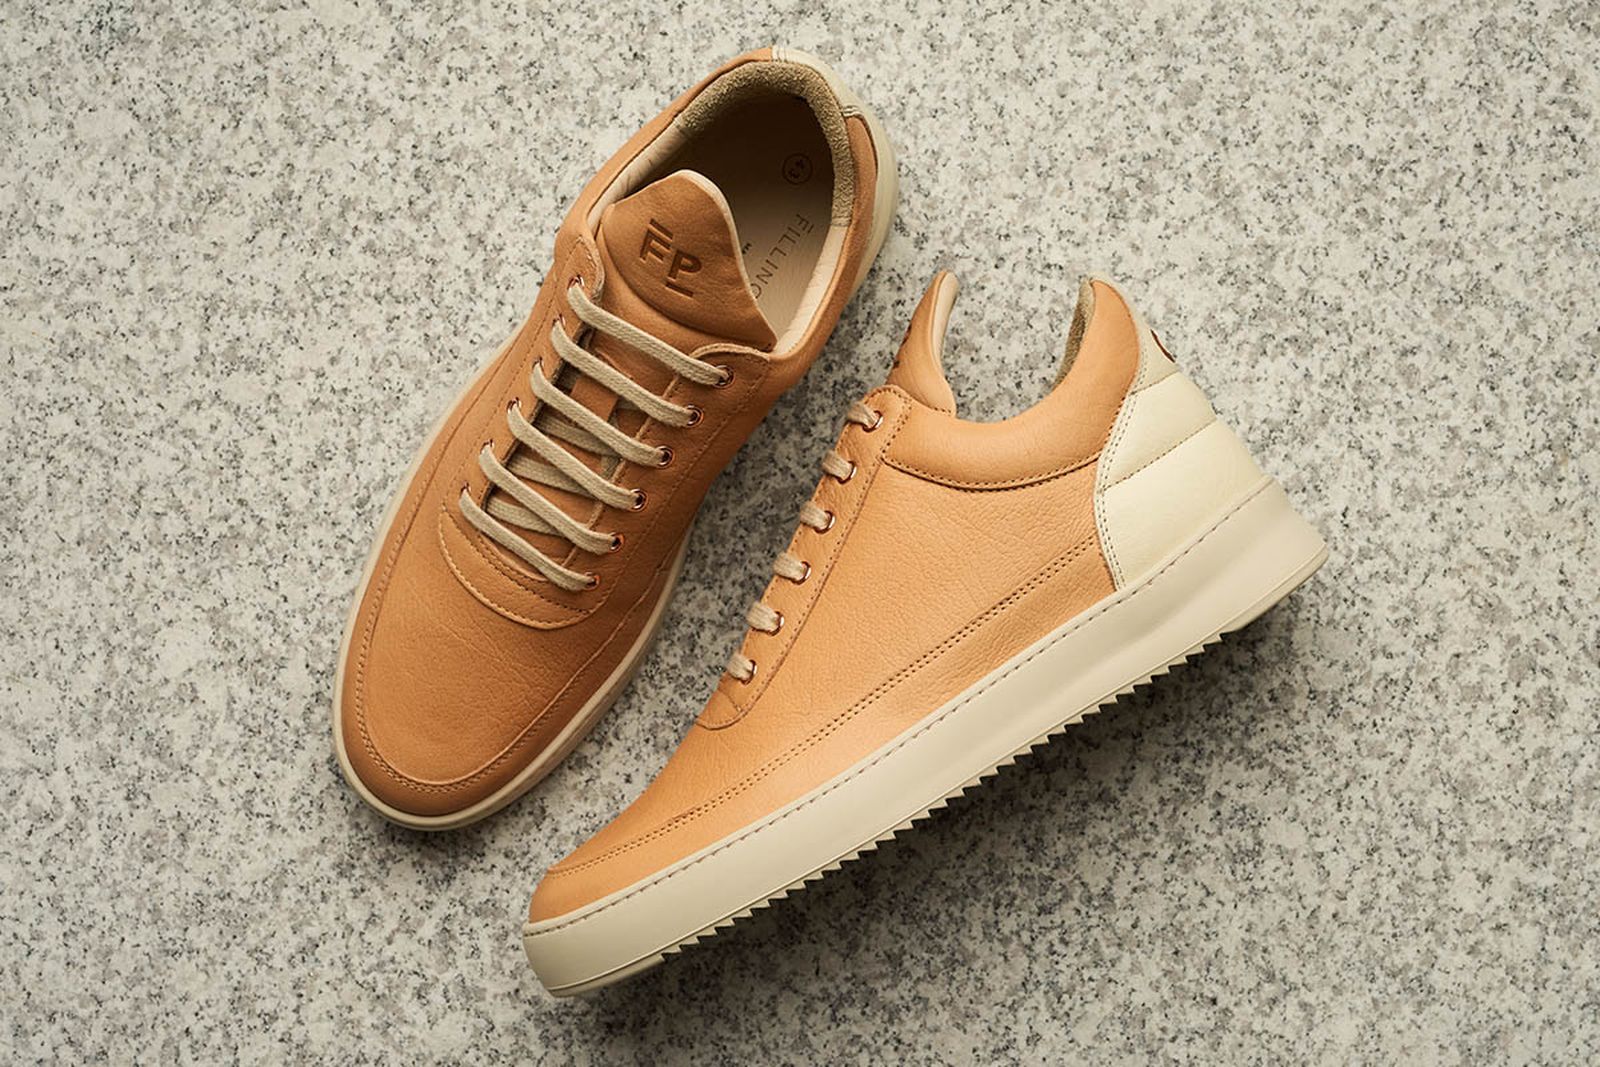 Caliroots and Filling Pieces